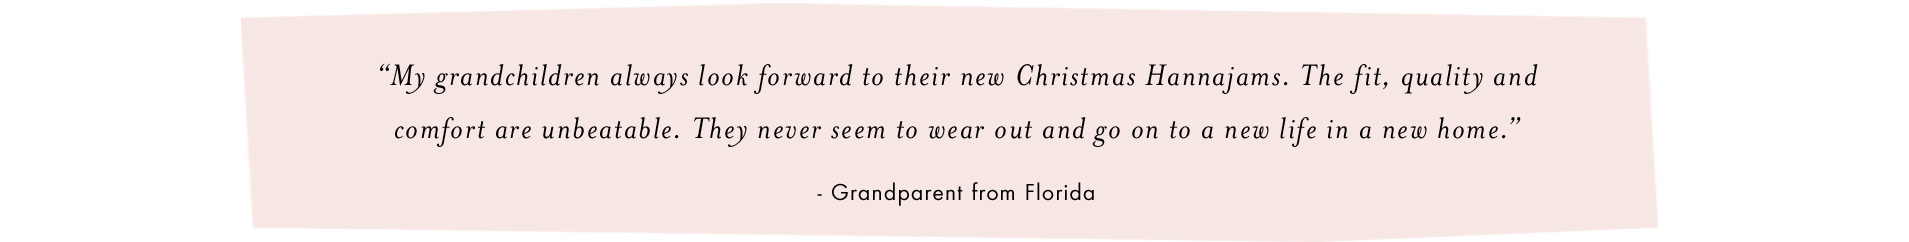 My grandchild always look forward to their new Christmas Hannajams. The fit, quality and comfort are unbeatable. They never seem to wear out and go on to a new life in a new home. -Grandparent from Florida